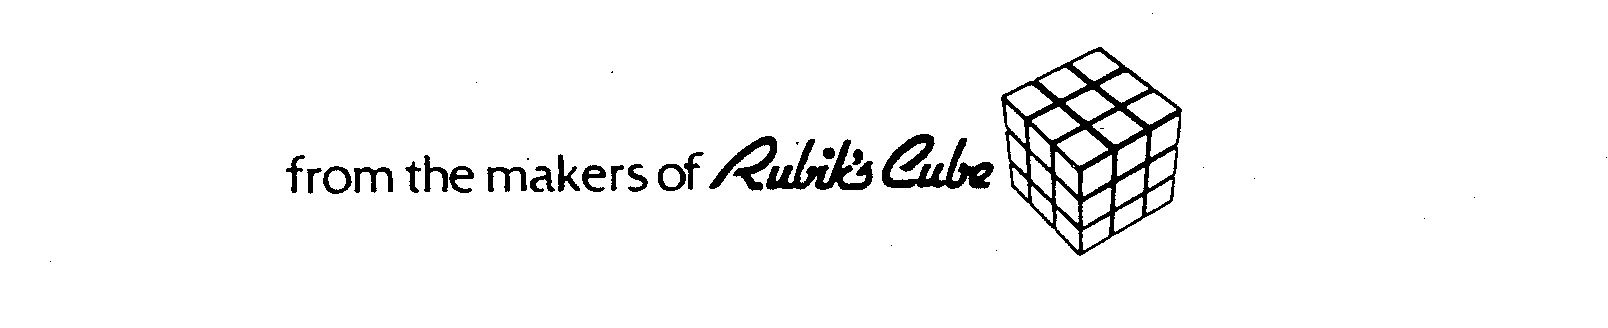 Trademark Logo FROM THE MAKERS OF RUBIK'S CUBE